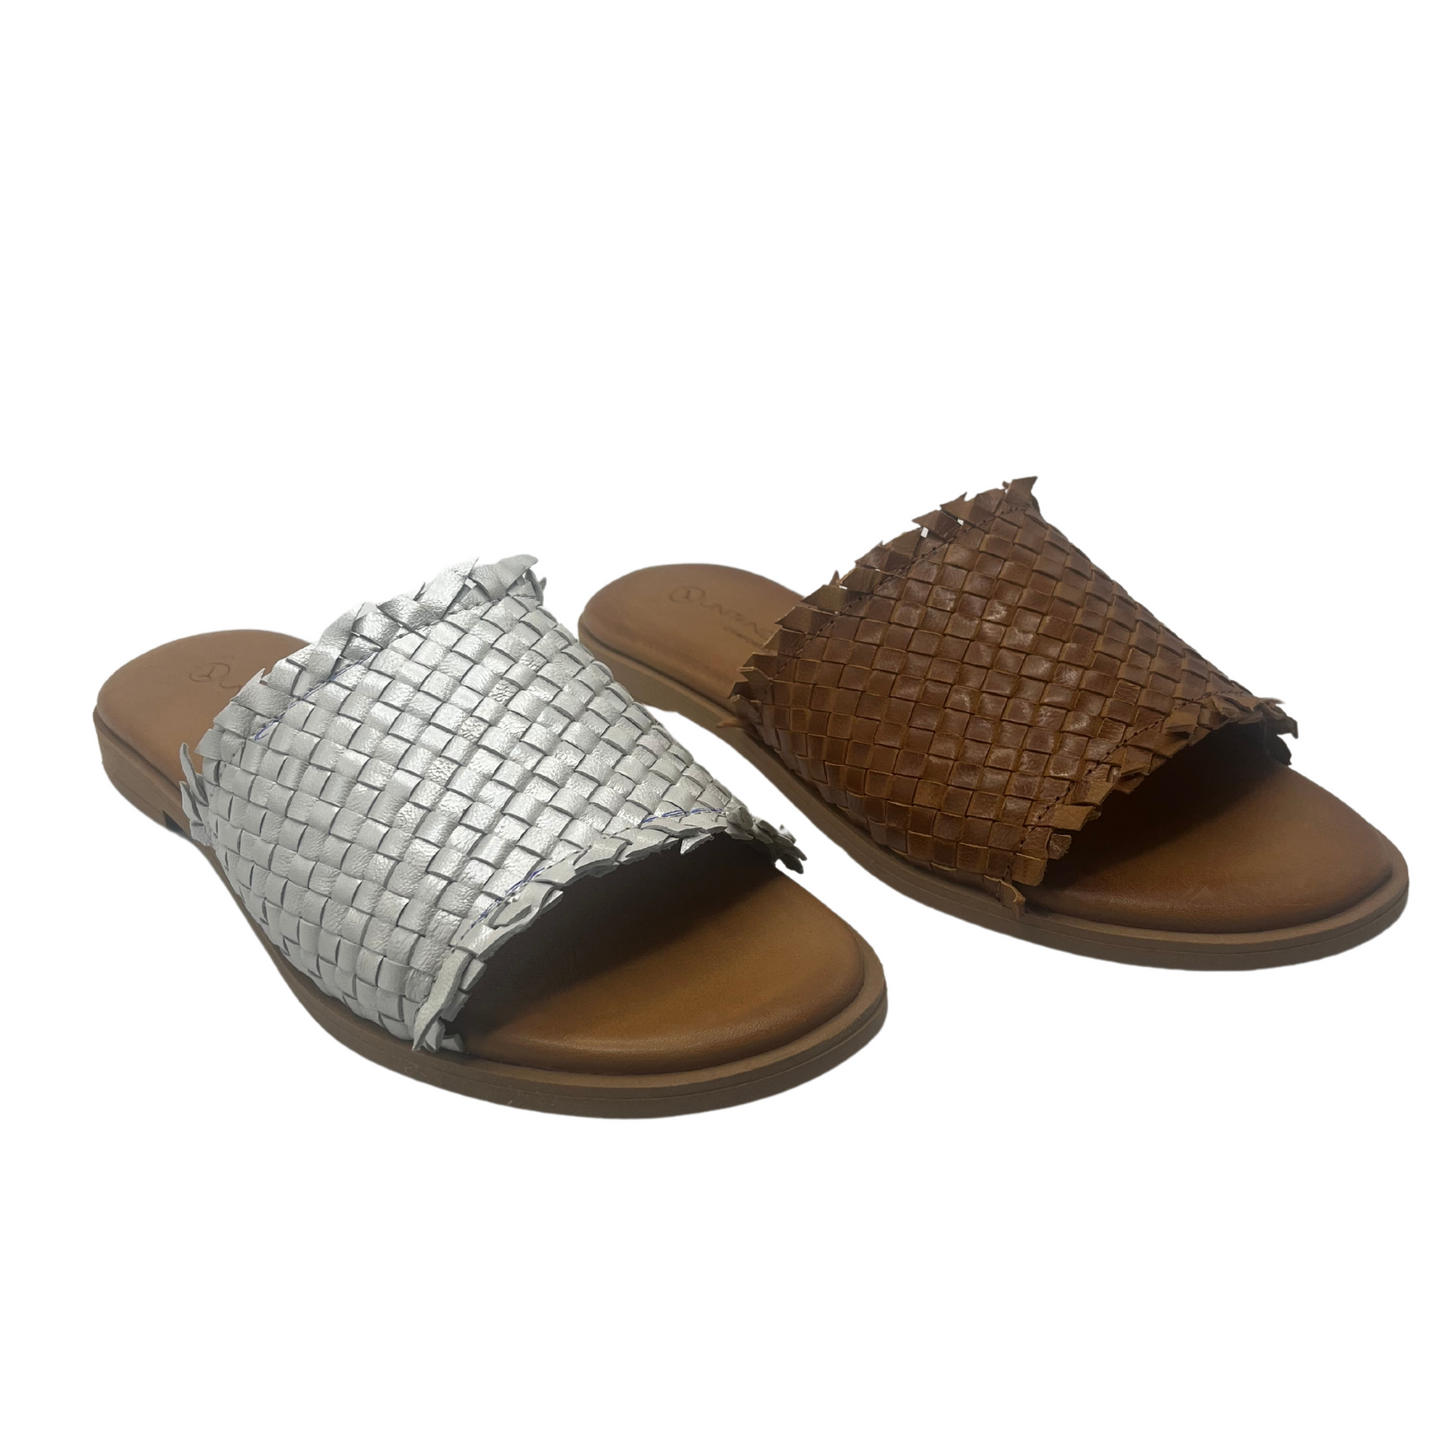 45 degree angled view of two woven leather slip on sandals. The left one is silver and the right one is brown. Both have brown leather footbeds. 